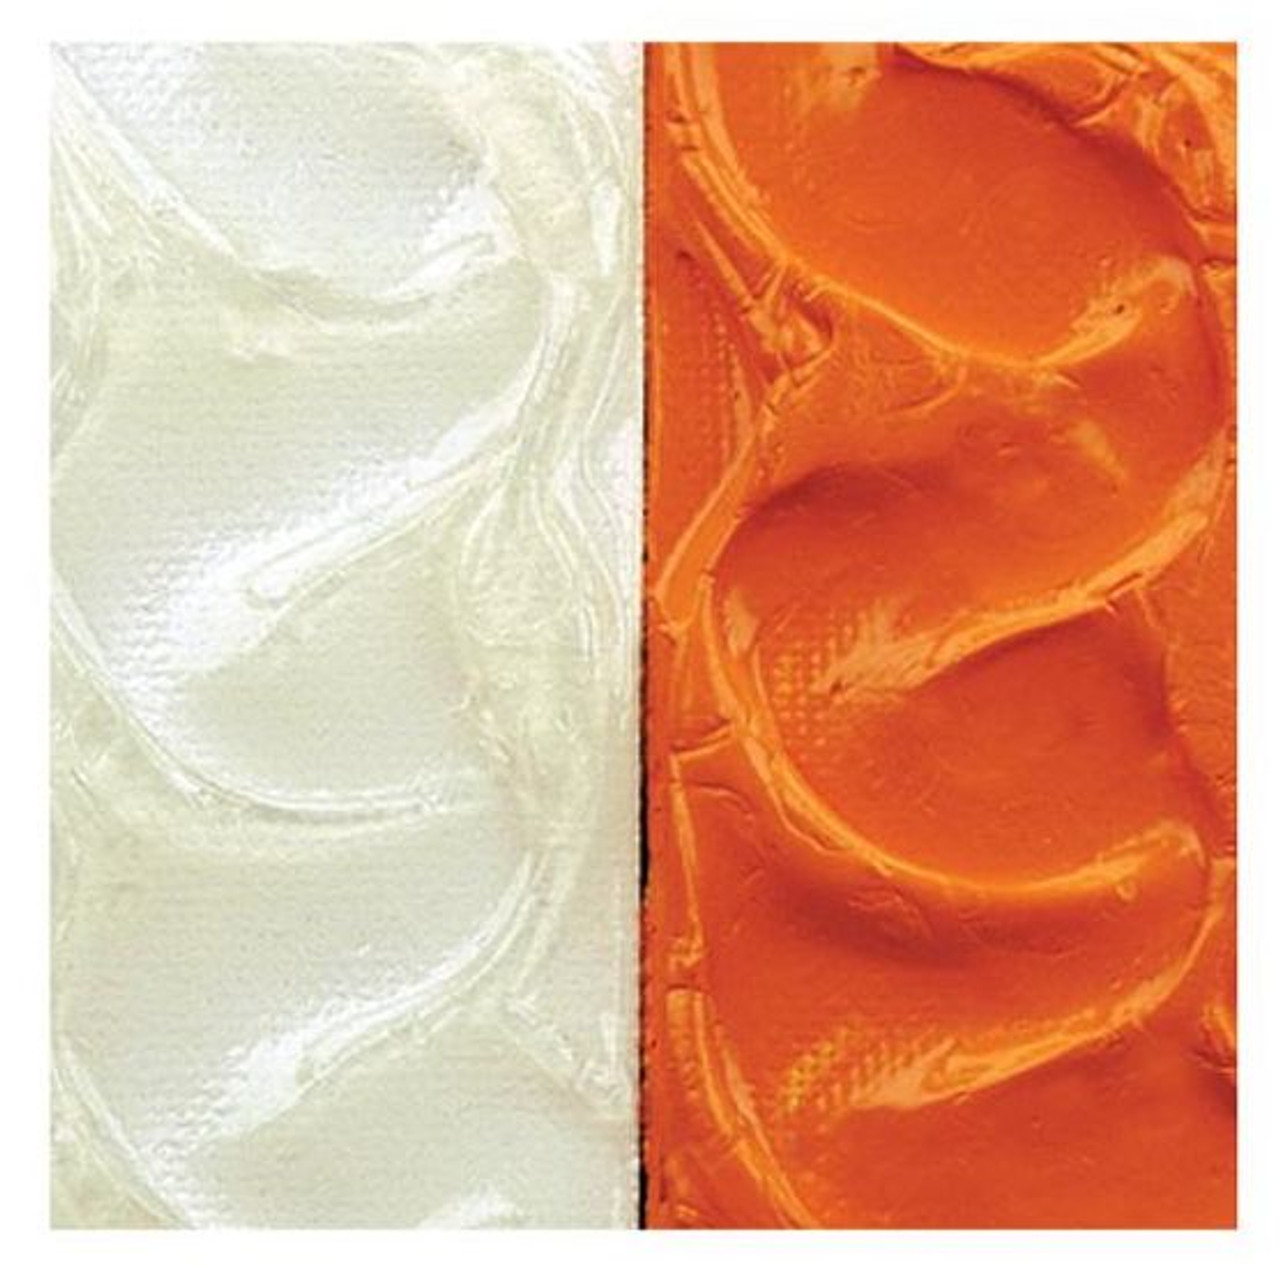 How About Orange: How to transfer an image to fabric with gel medium